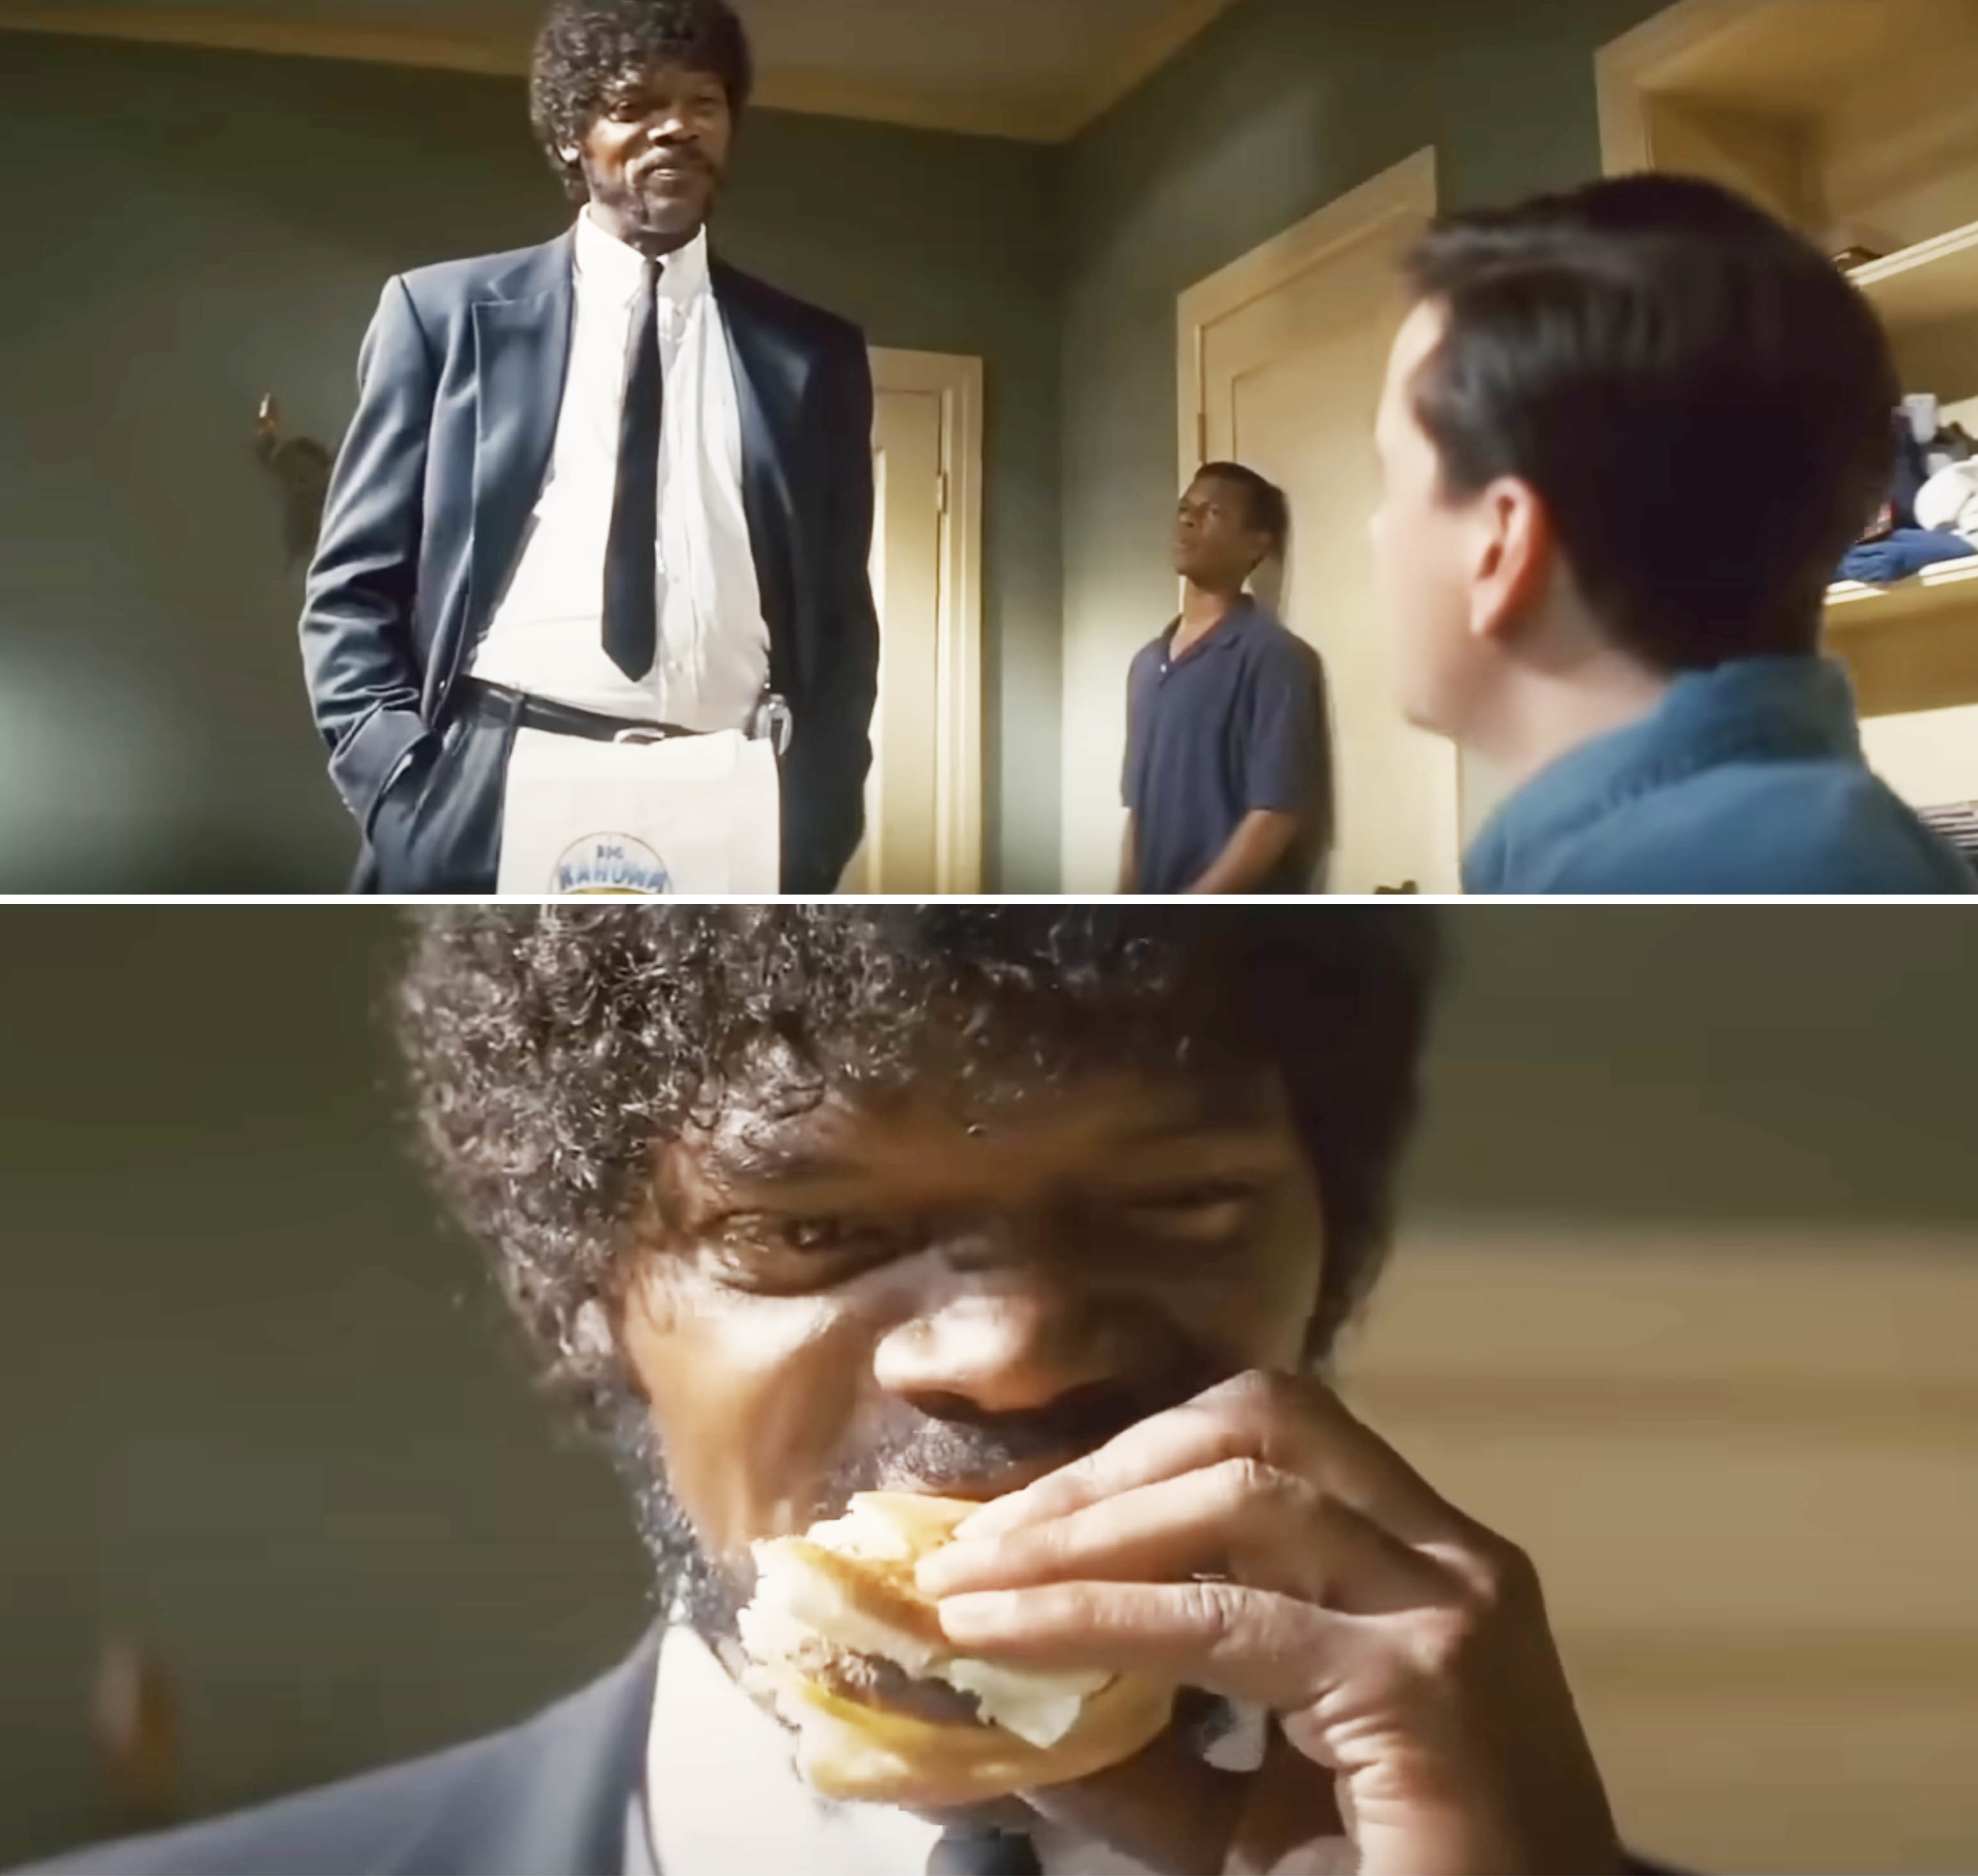 Jules Winnfield from &quot;Pulp Fiction&quot; stands in a kitchen with a bitten burger, tension between him and another character